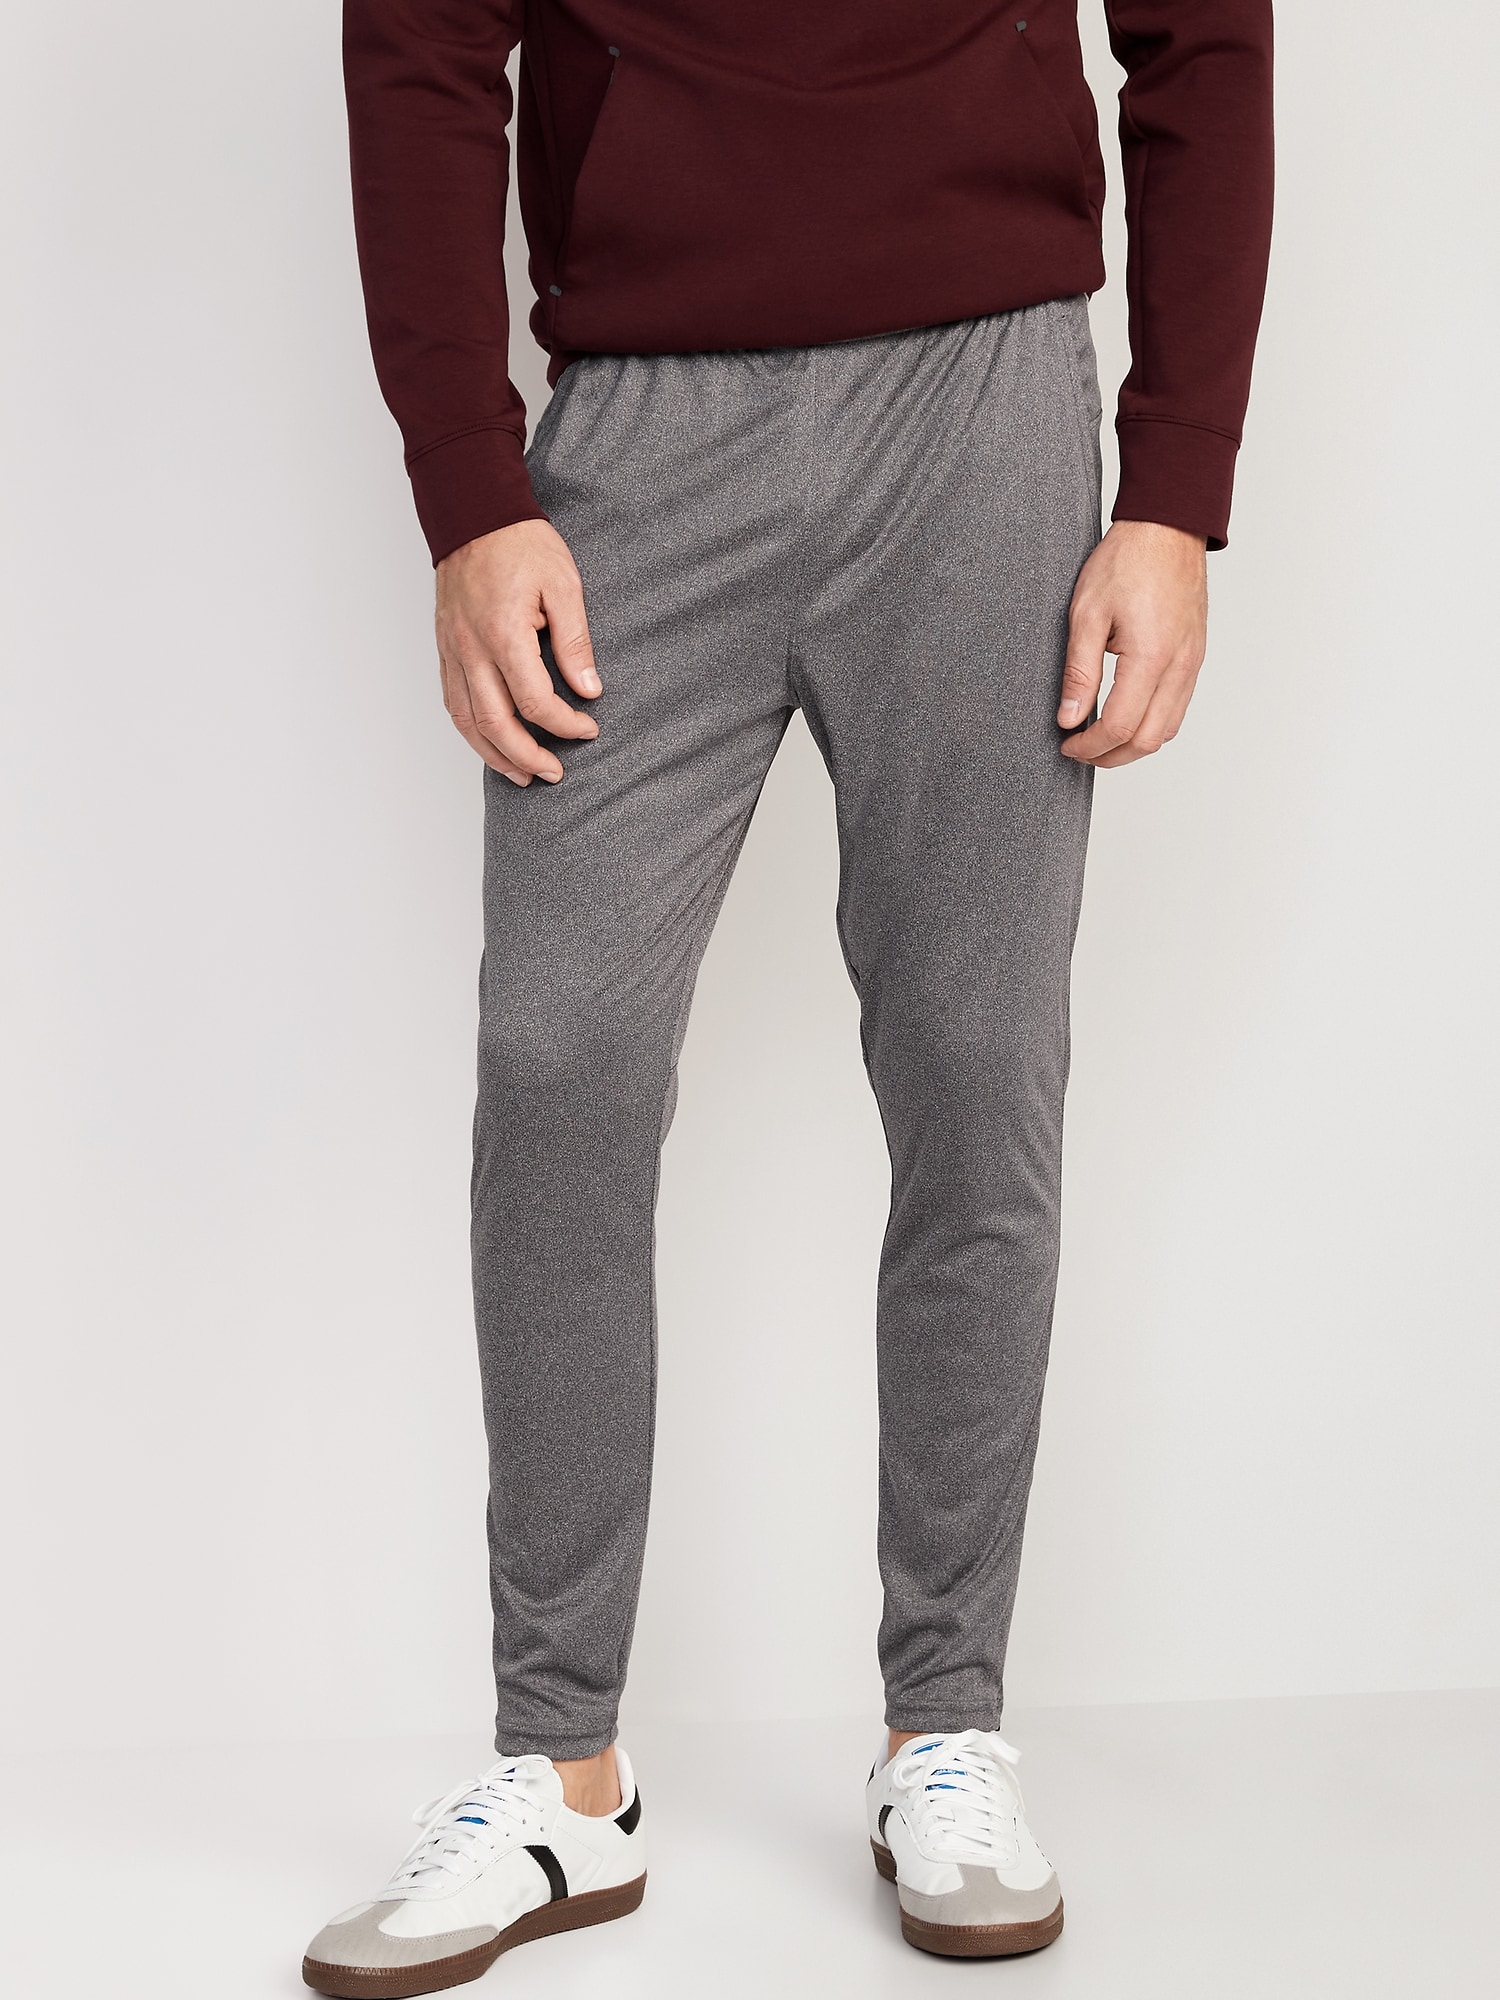 Go-Dry Tapered Performance Sweatpants Hot Deal